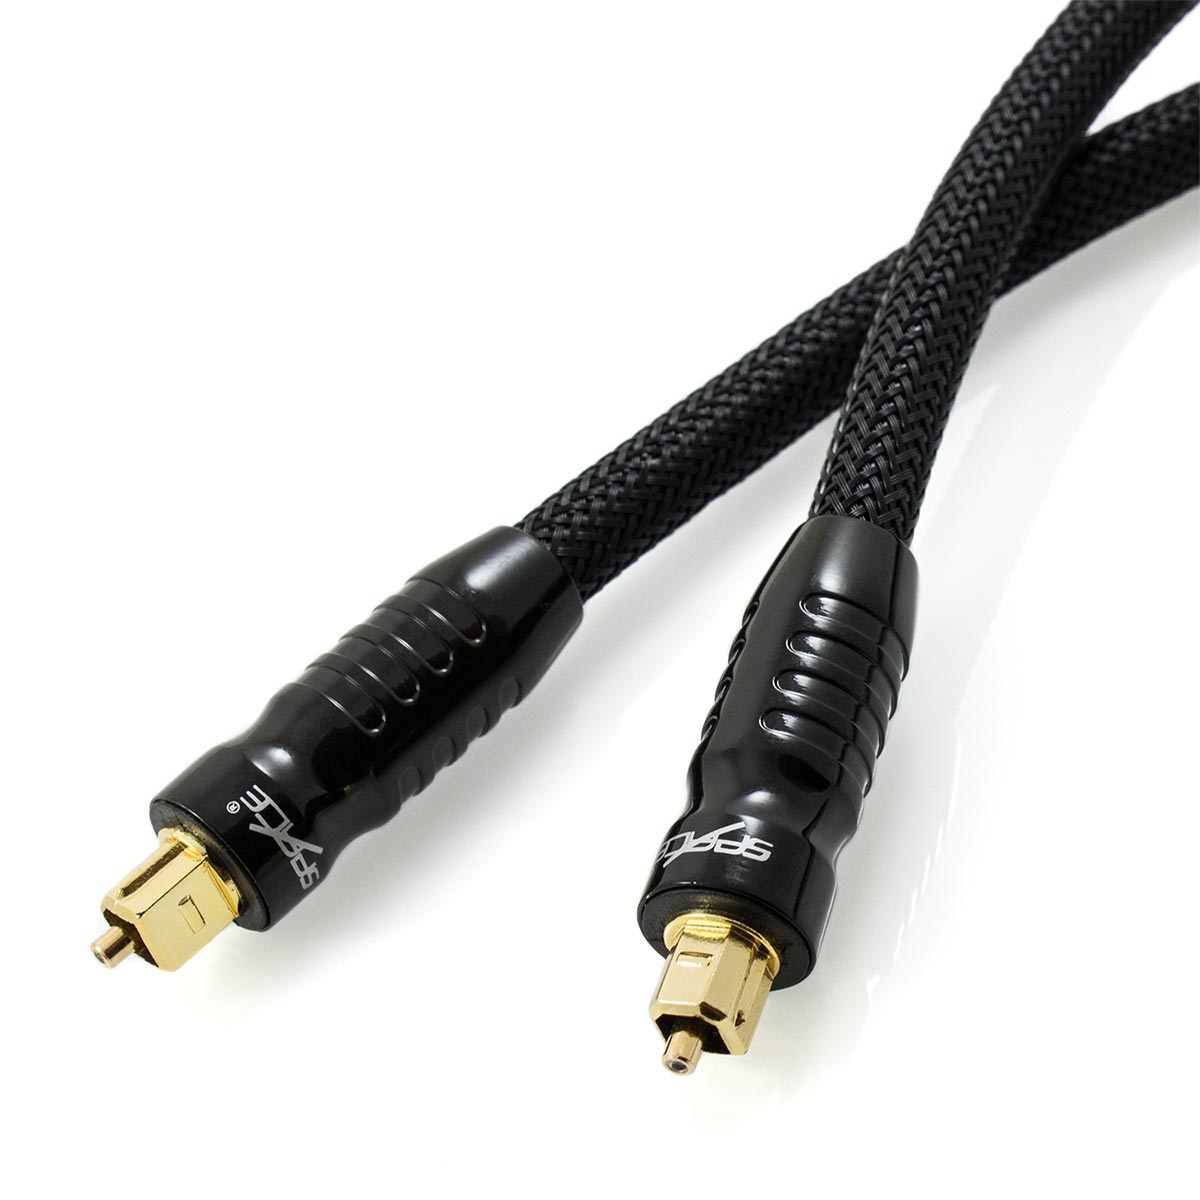 optical-toslink-cable-space-saturn-series-03-1200x1200.jpg